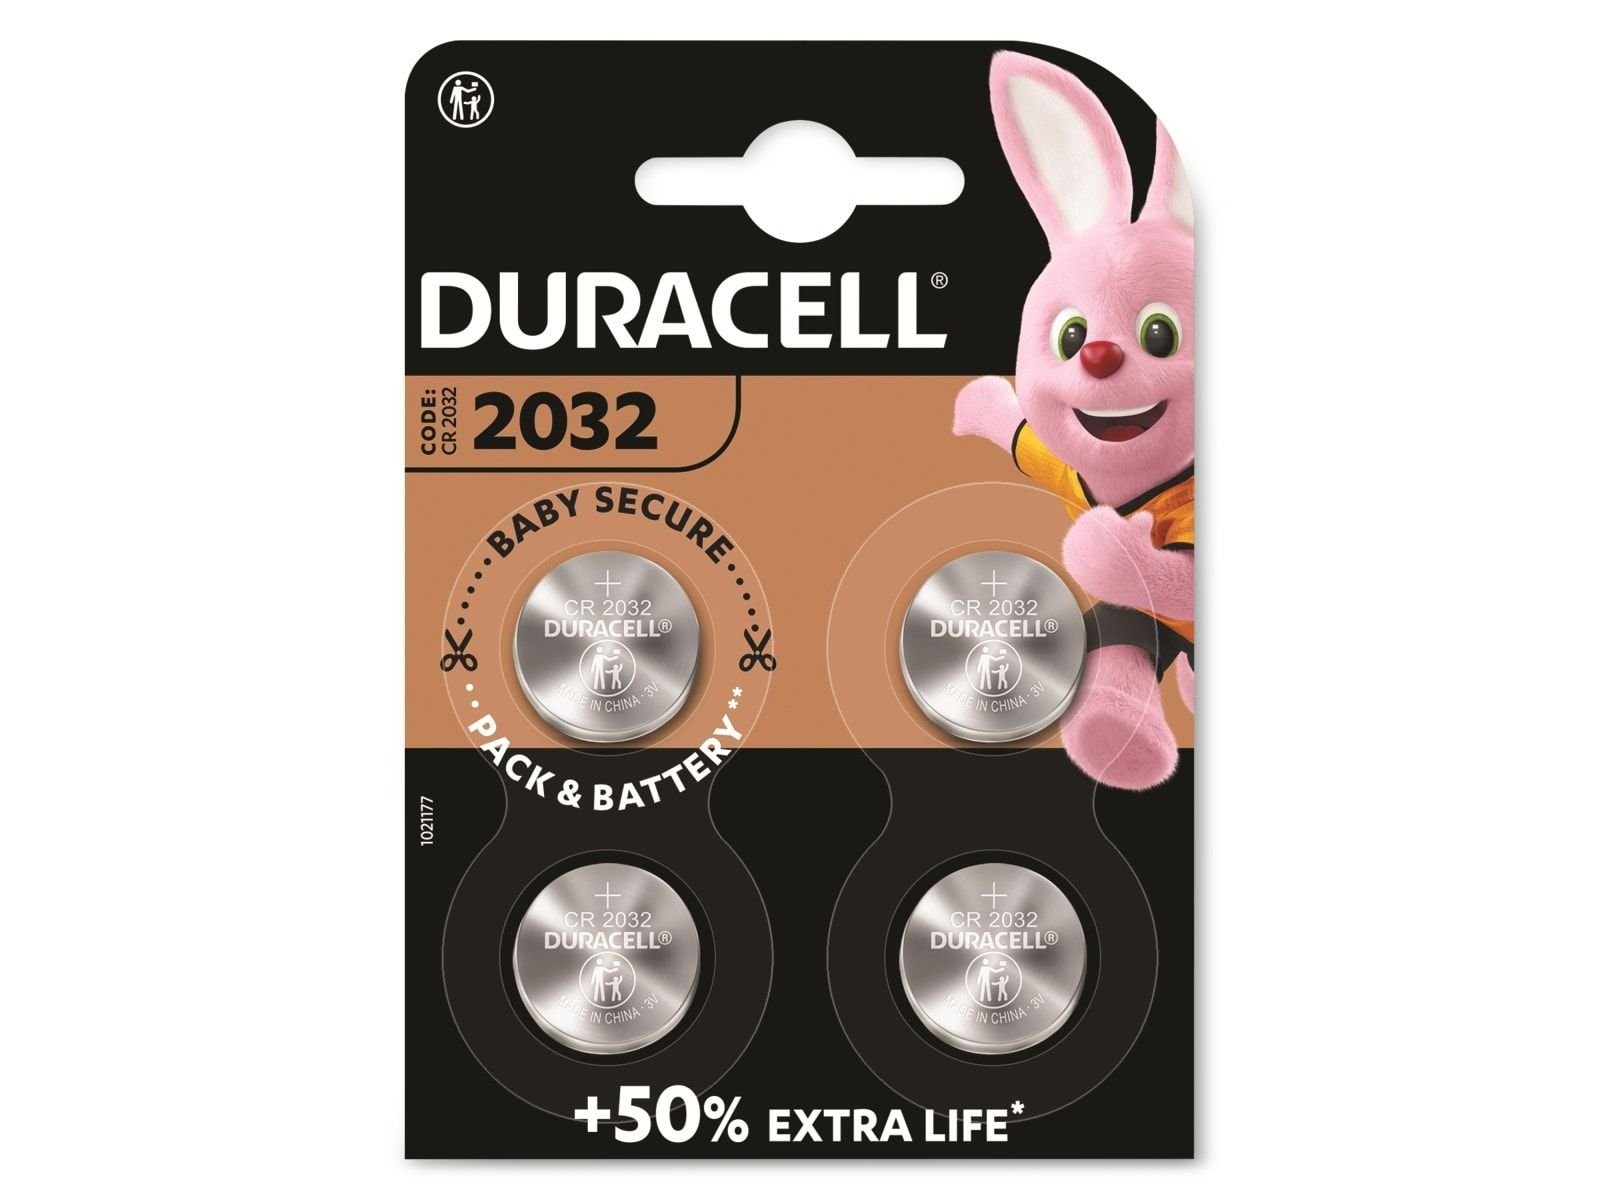 Duracell DURACELL Lithium-Knopfzelle CR2032, 3V Knopfzelle